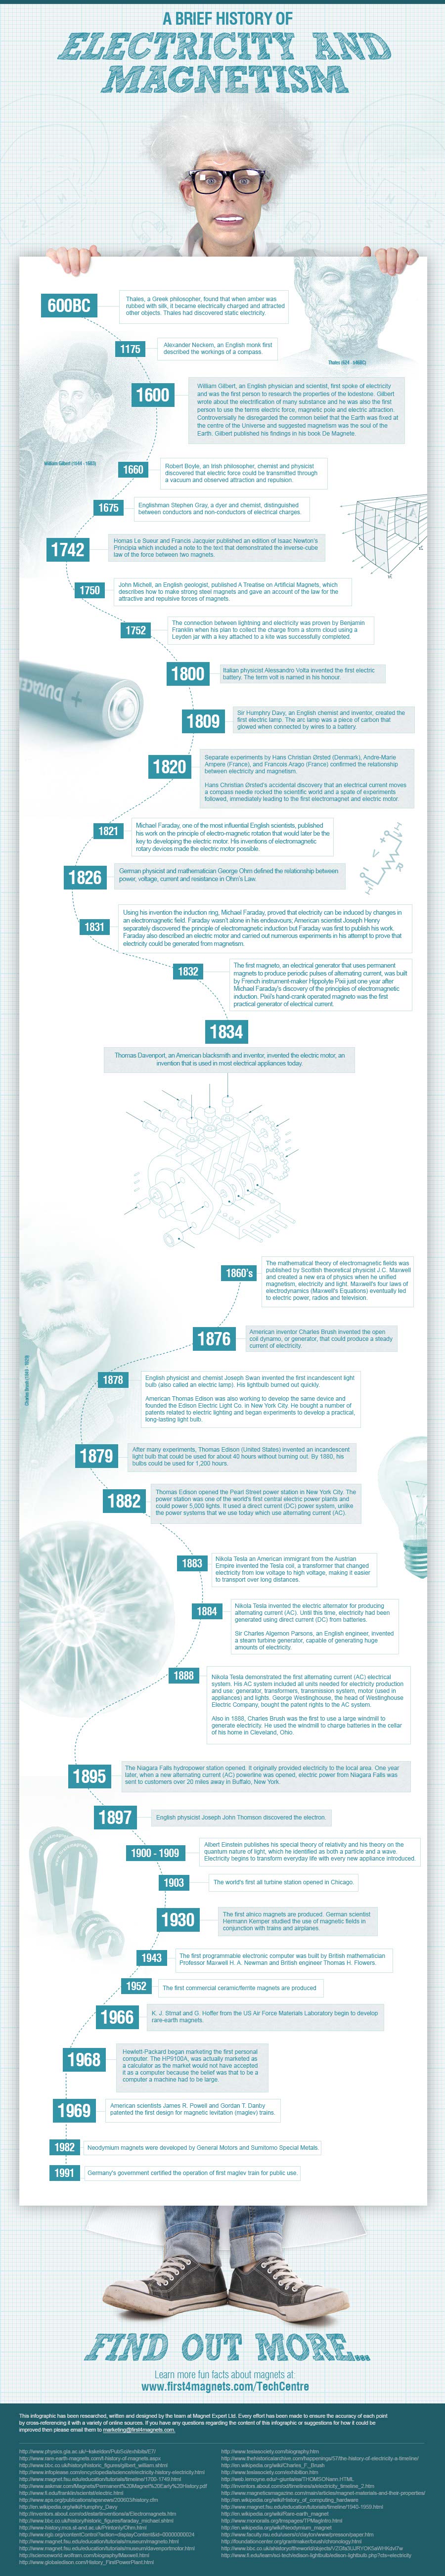 Electricity and Magnetism Timeline-Infographic